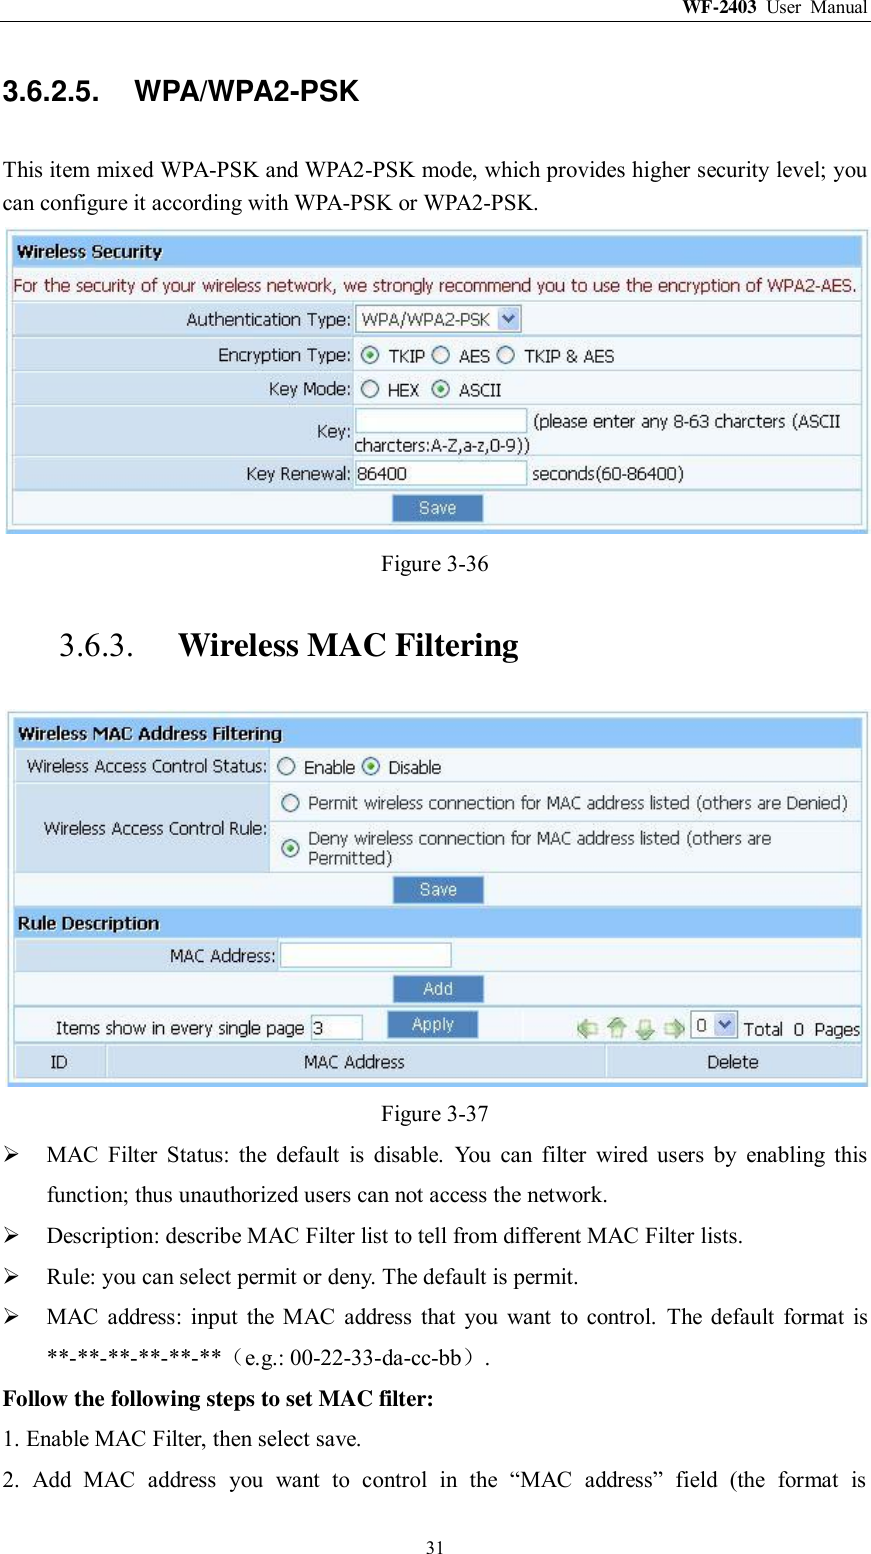 WF-2403  User  Manual  31 3.6.2.5.  WPA/WPA2-PSK This item mixed WPA-PSK and WPA2-PSK mode, which provides higher security level; you can configure it according with WPA-PSK or WPA2-PSK.  Figure 3-36 3.6.3. Wireless MAC Filtering  Figure 3-37  MAC  Filter  Status:  the  default  is  disable.  You  can  filter  wired  users  by  enabling  this function; thus unauthorized users can not access the network.  Description: describe MAC Filter list to tell from different MAC Filter lists.  Rule: you can select permit or deny. The default is permit.  MAC  address:  input  the  MAC  address  that  you  want  to  control.  The  default  format  is **-**-**-**-**-**（e.g.: 00-22-33-da-cc-bb）. Follow the following steps to set MAC filter:   1. Enable MAC Filter, then select save. 2.  Add  MAC  address  you  want  to  control  in  the  “MAC  address”  field  (the  format  is 